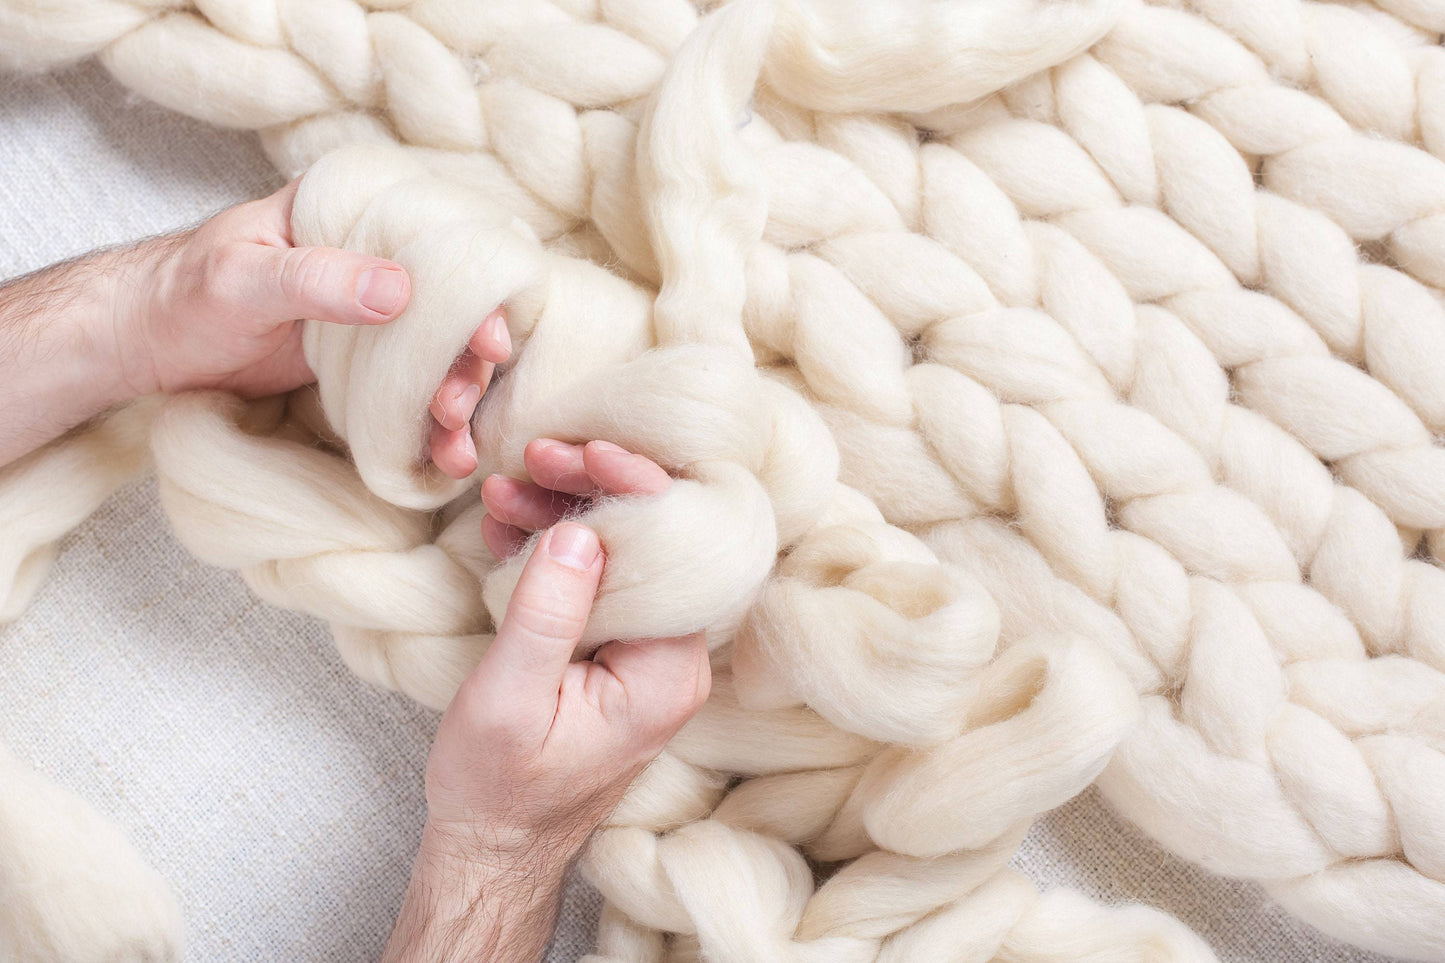 Wool Roving Top 8 lbs Pounds White DIY Roving Fiber Spinning, Make Your Own- Felting Crafts Large Chunky (Arm or PVC) Knit Throw Blanket USA